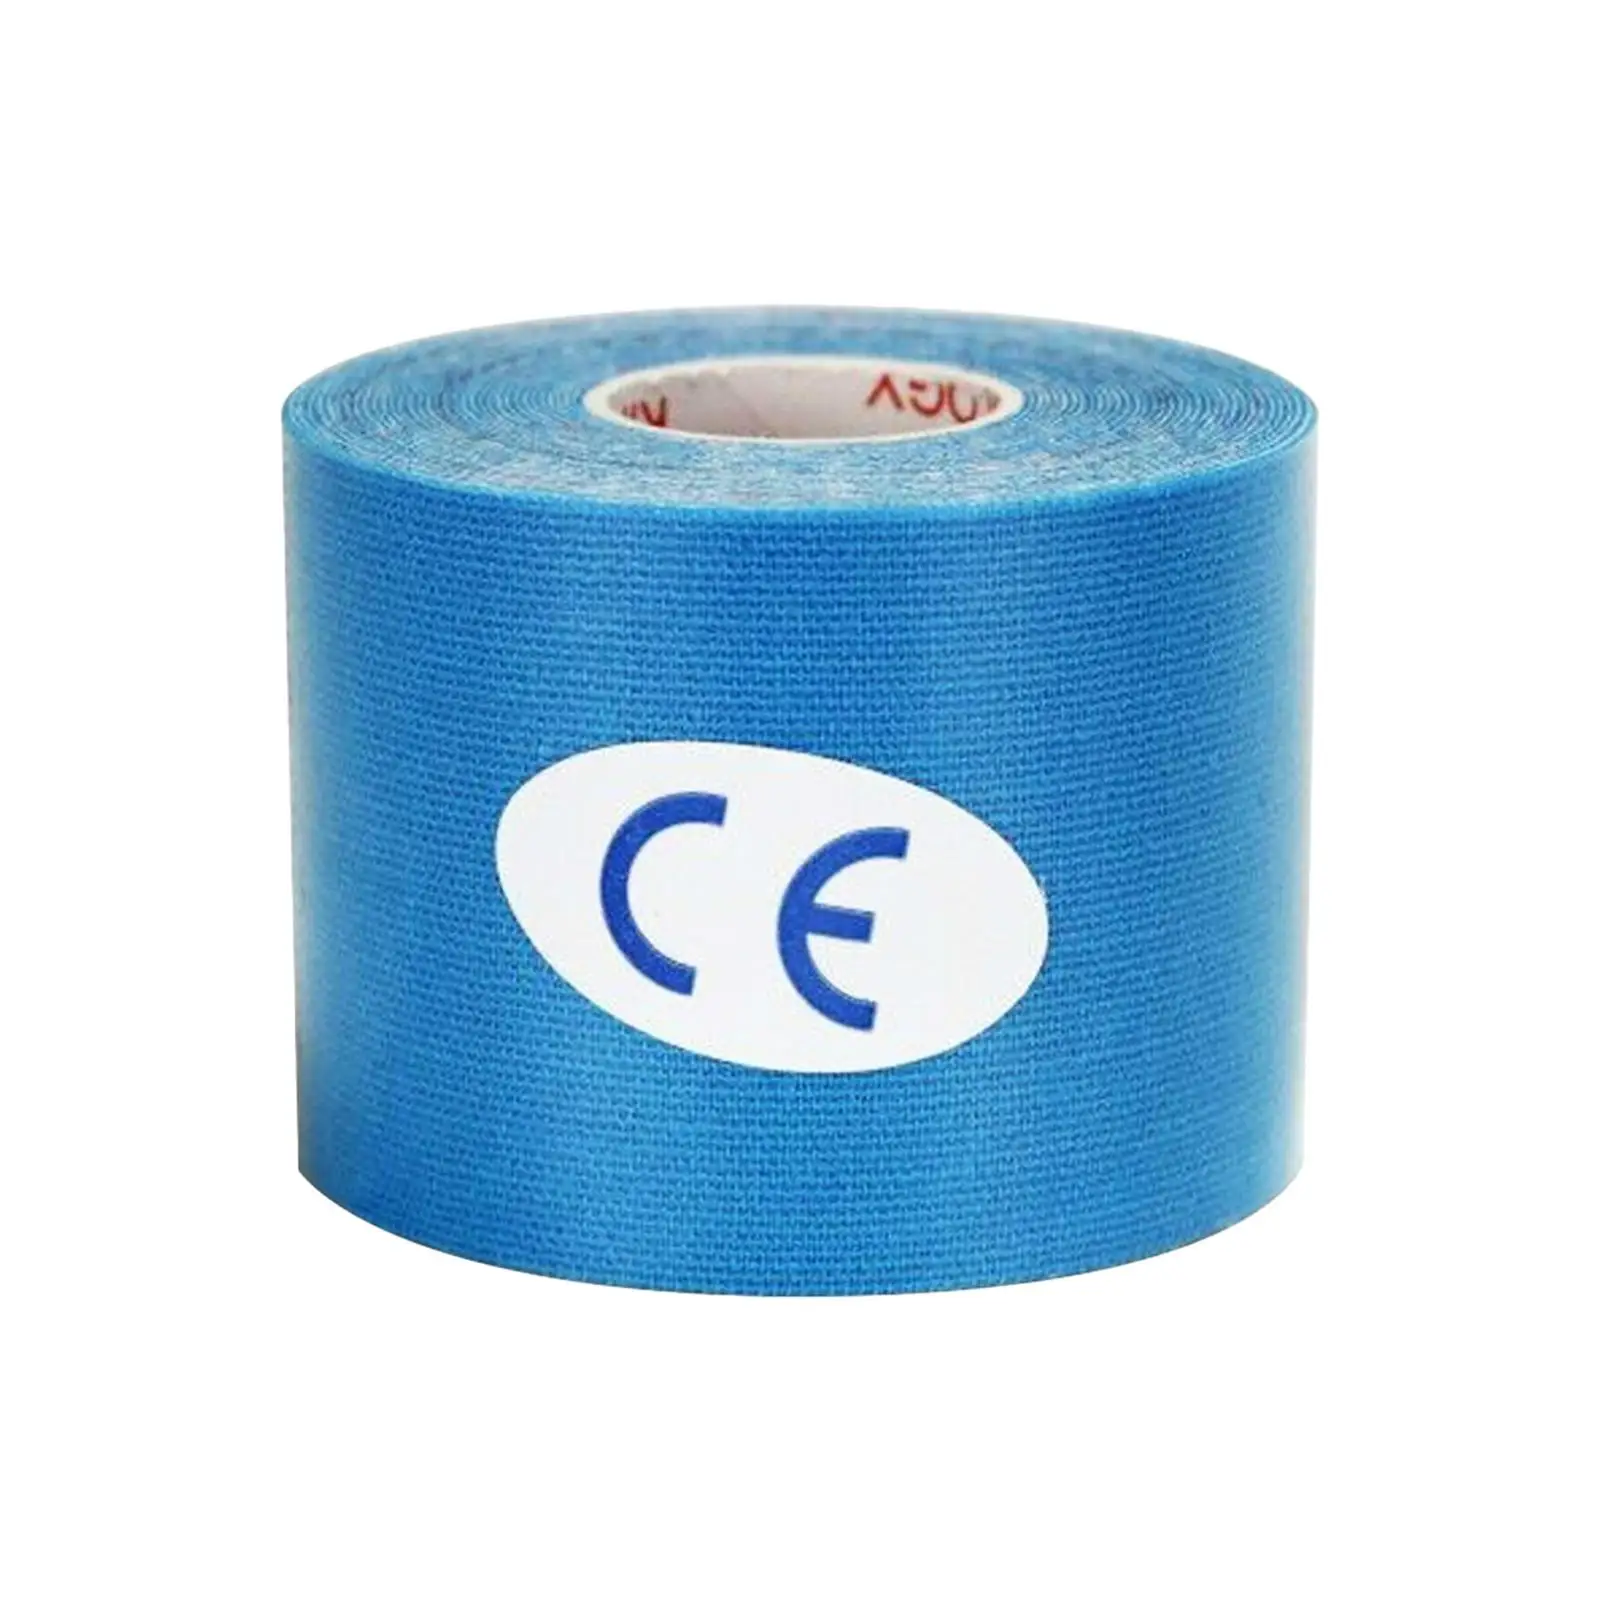 Sports Wrap Tape Athletic Tape Easy Tear 16ft Wrap Wrist Ankle Tape Protective Tape for Hands Shoulder Chest Wrists Football